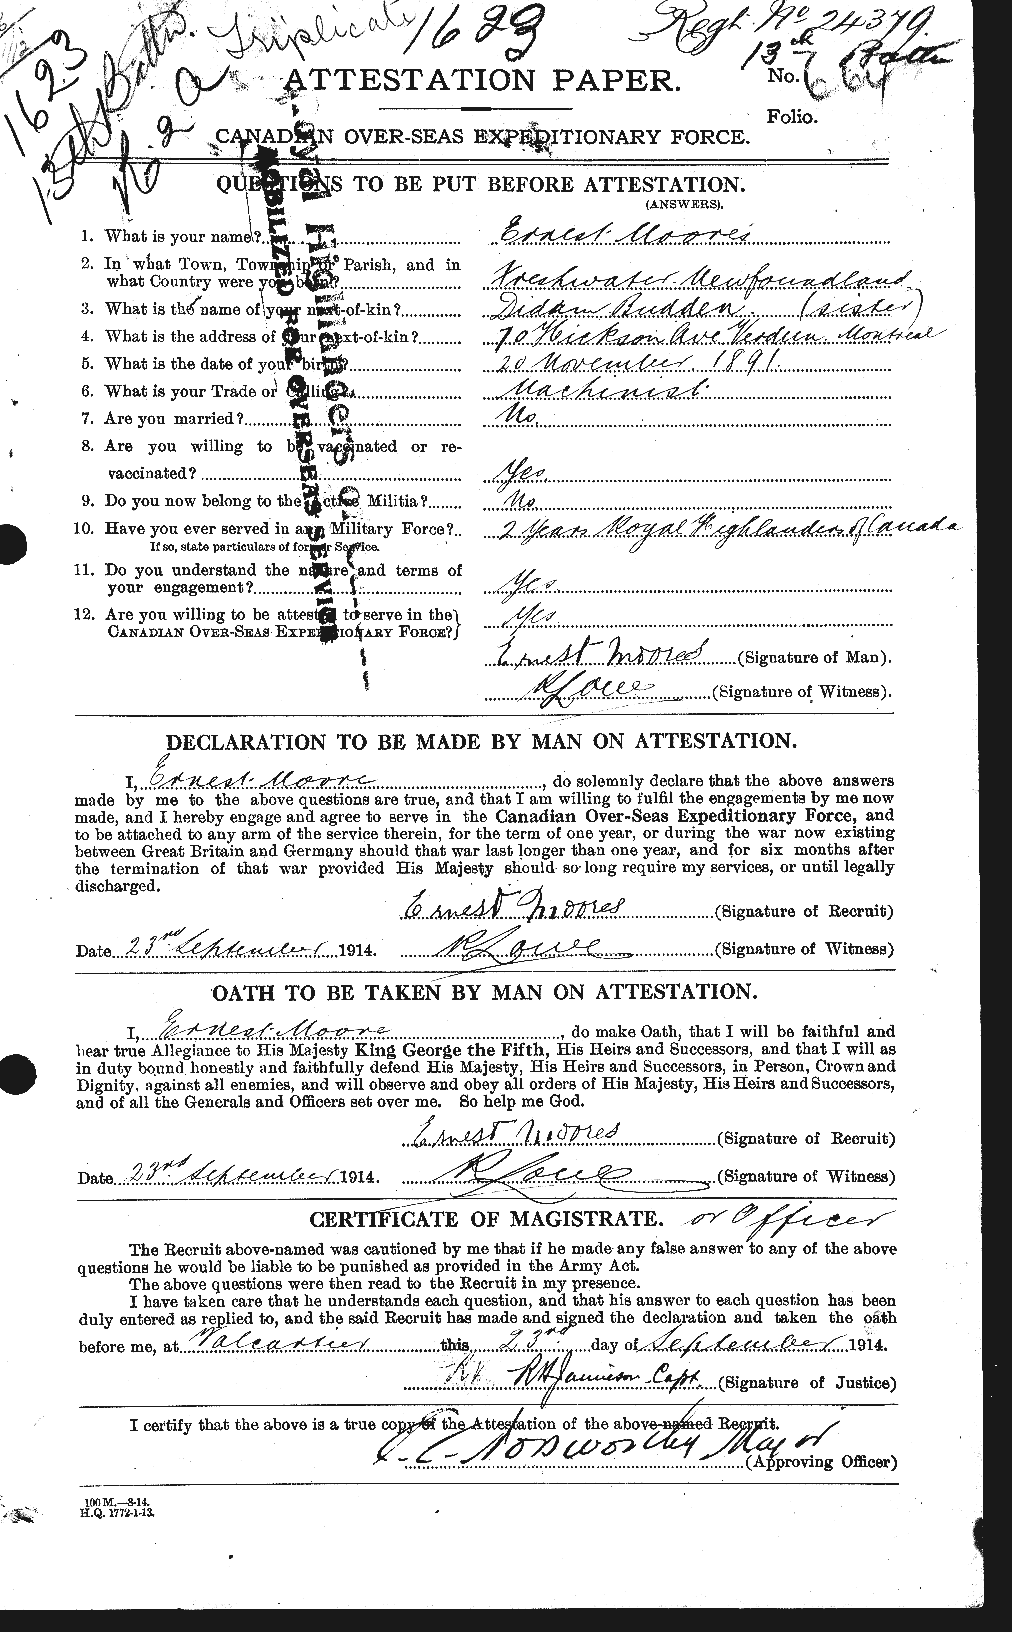 Personnel Records of the First World War - CEF 505896a